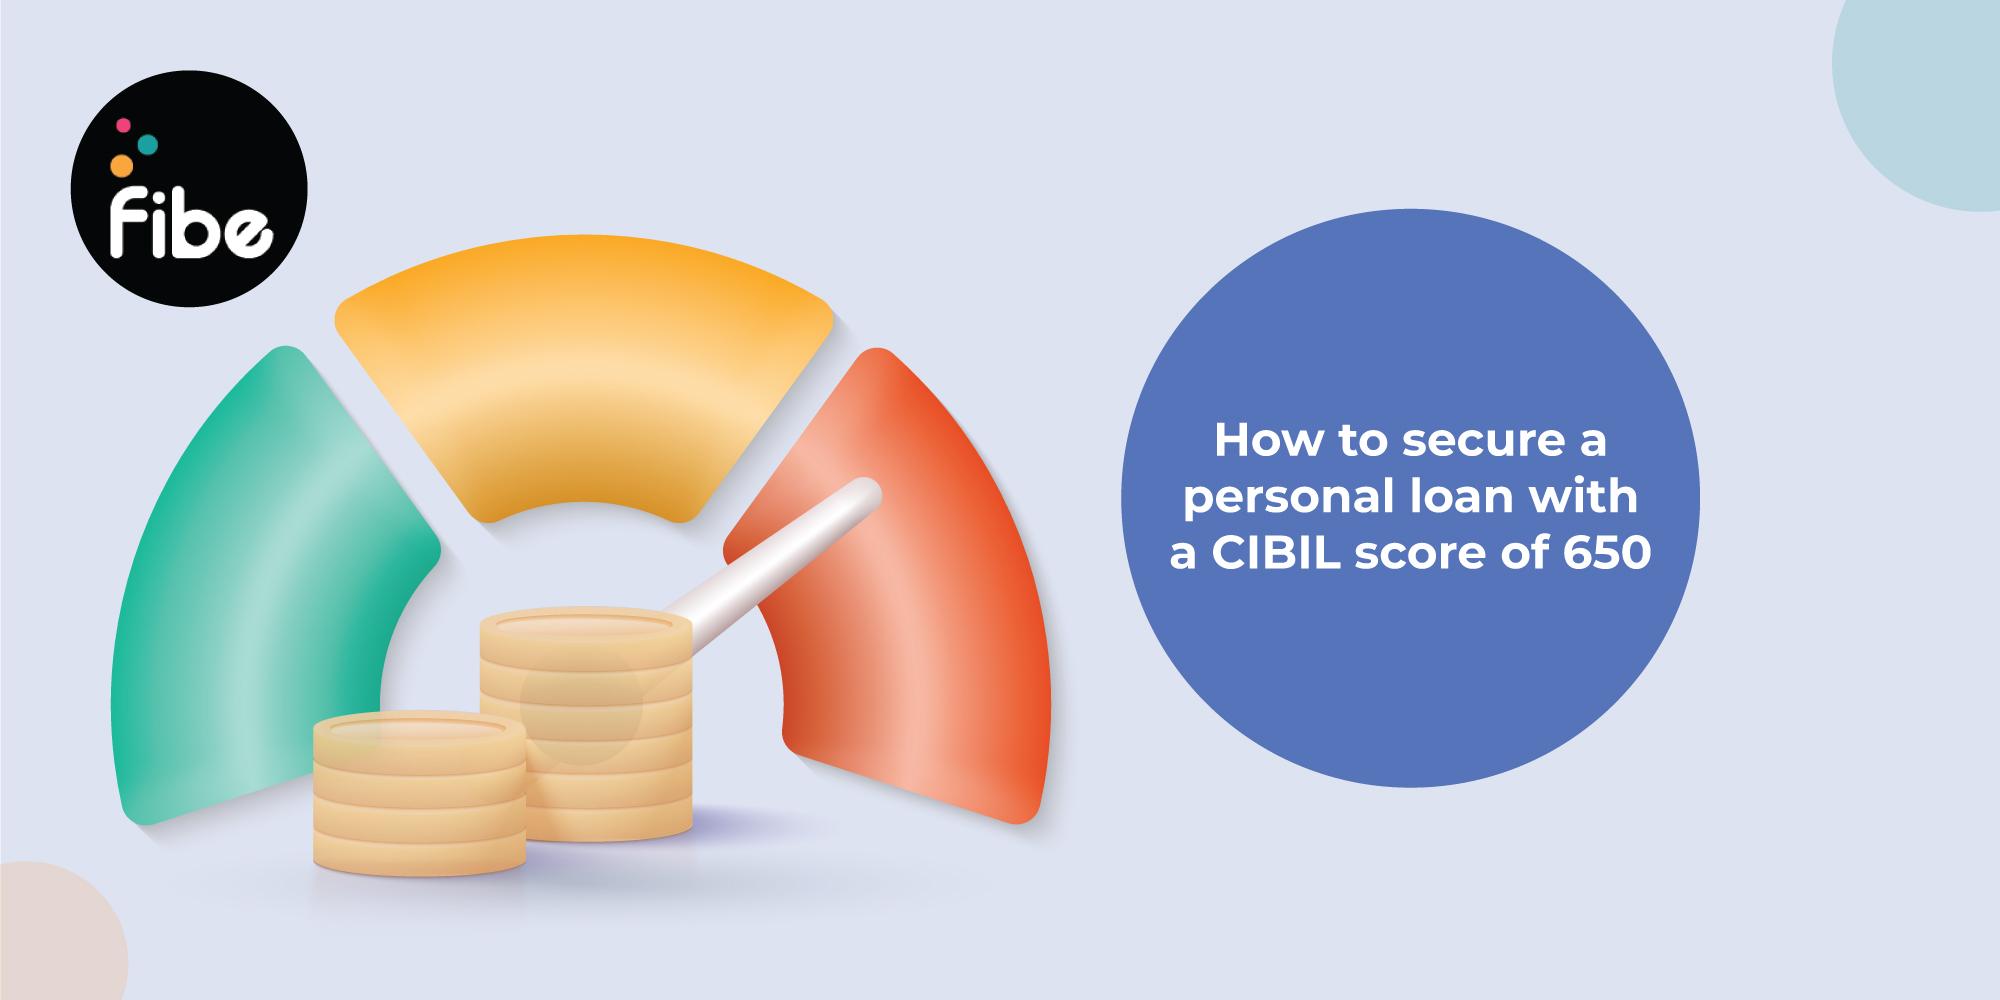 Personal Loan for CIBIL Score of 650: 6 tips to get approval from lenders